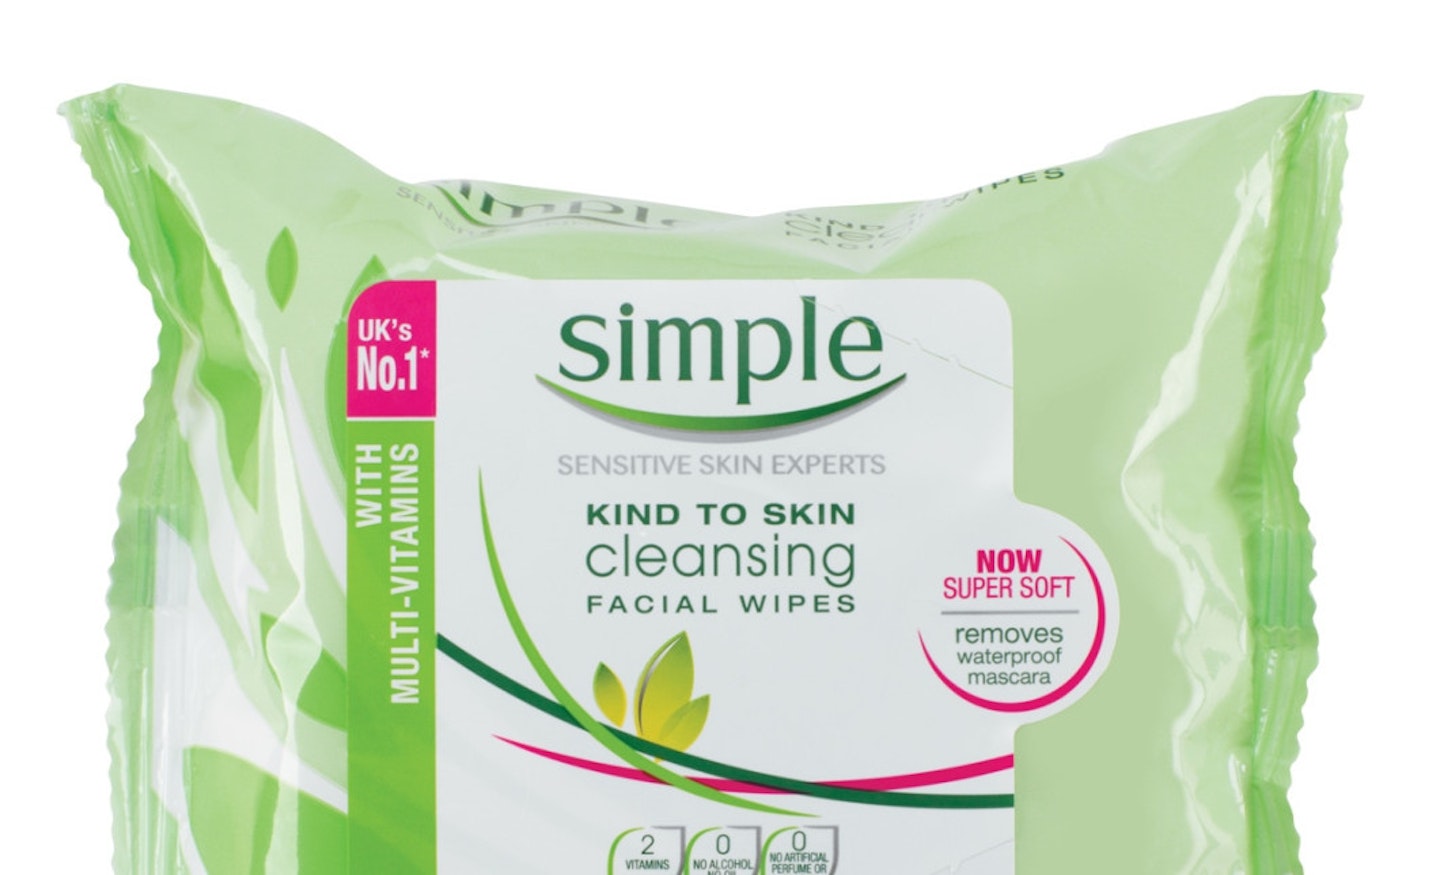 Simple Kind To Skin Cleansing Facial Wipes, £2.99